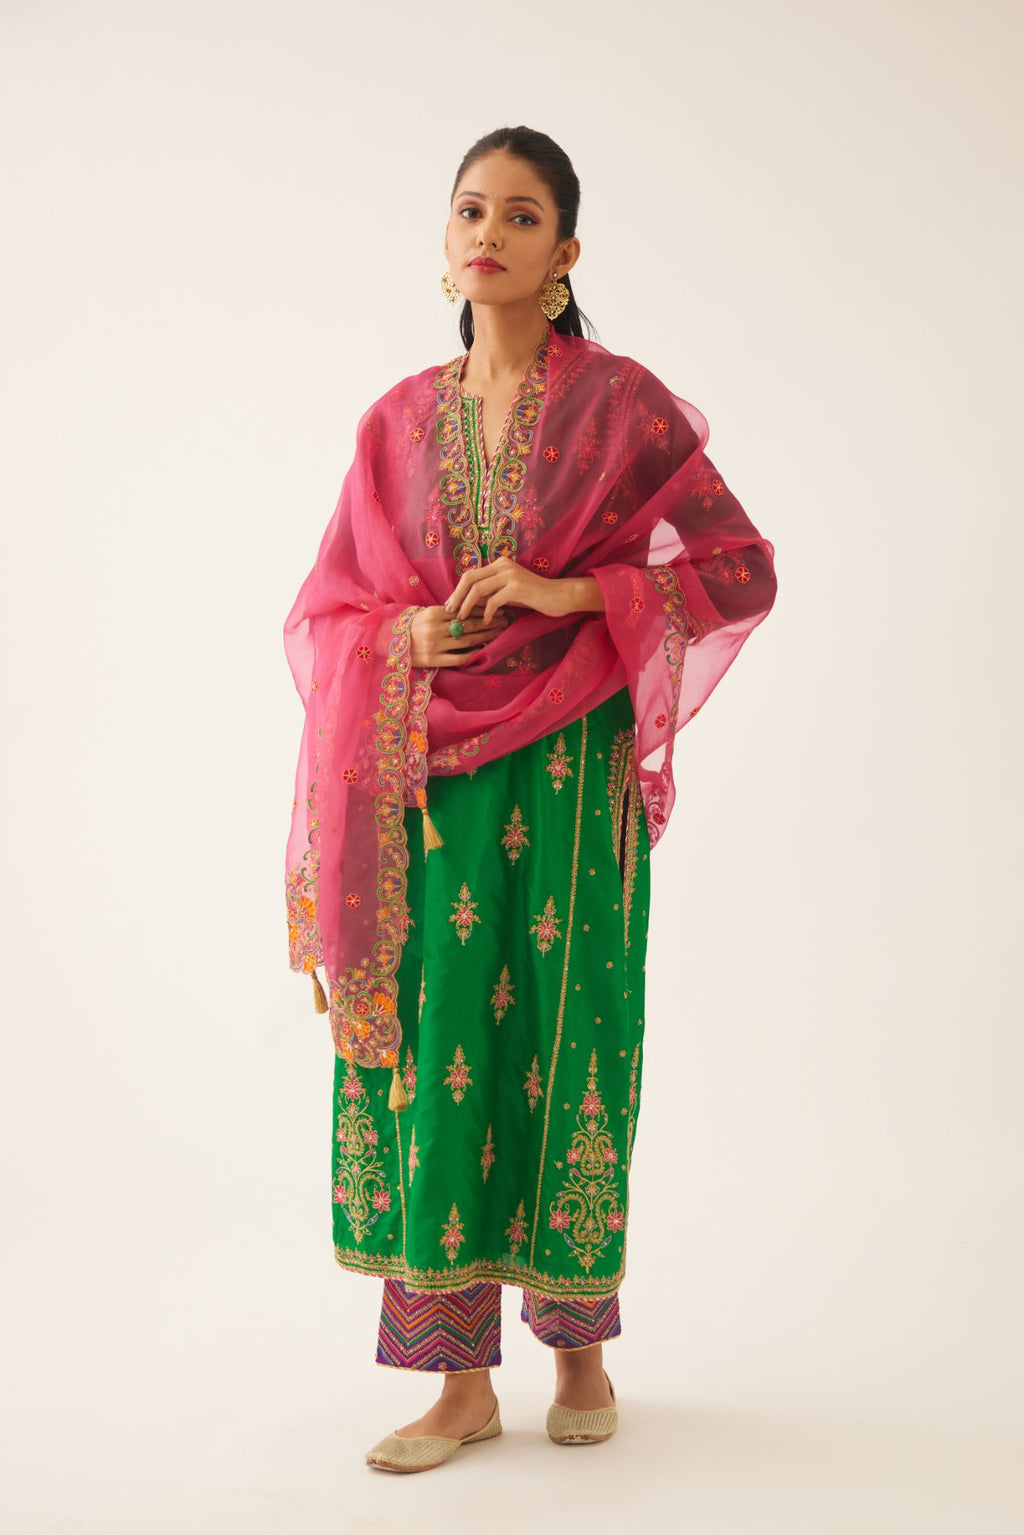 Fuchsia silk organza dupatta with all-over delicate dori & silk thread embroidery, highlighted with bead and sequins work.